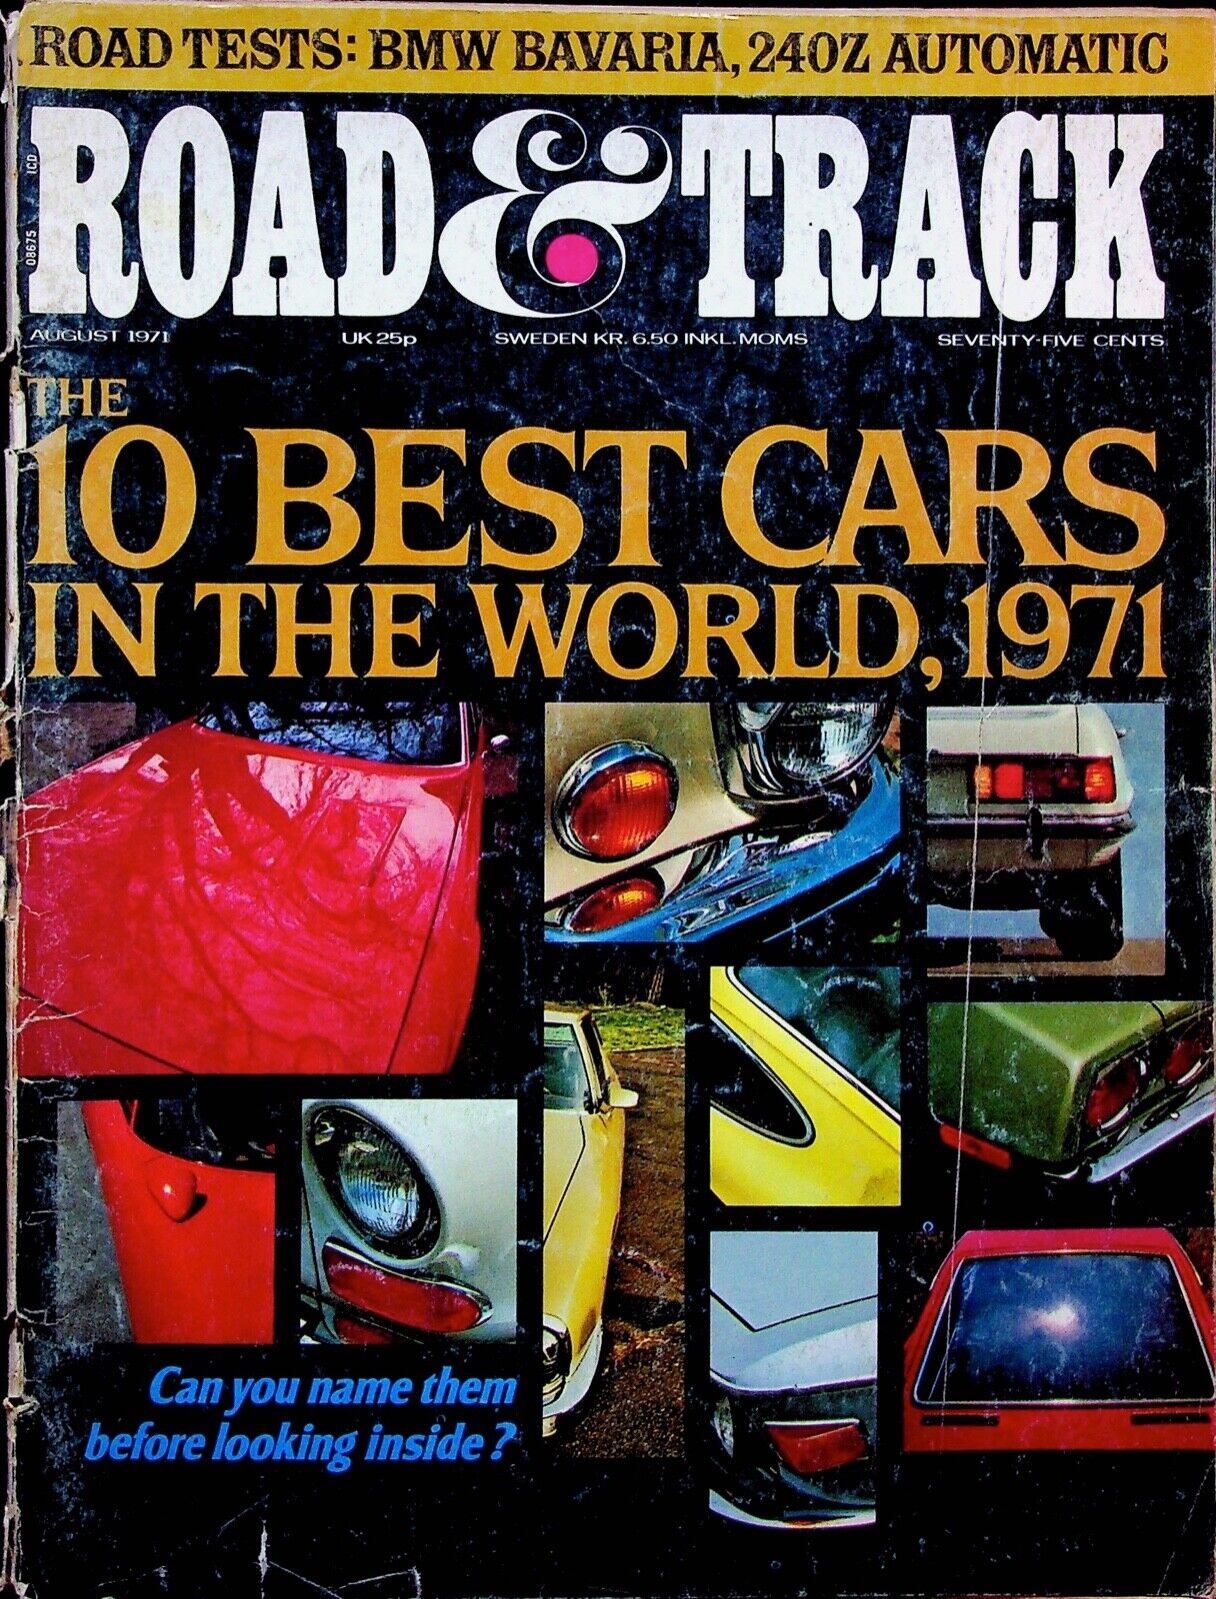 THE 10 BEST CARS IN THE WORLD, 1971 - ROAD & TRACK MAGAZINE - AUGUST 1971